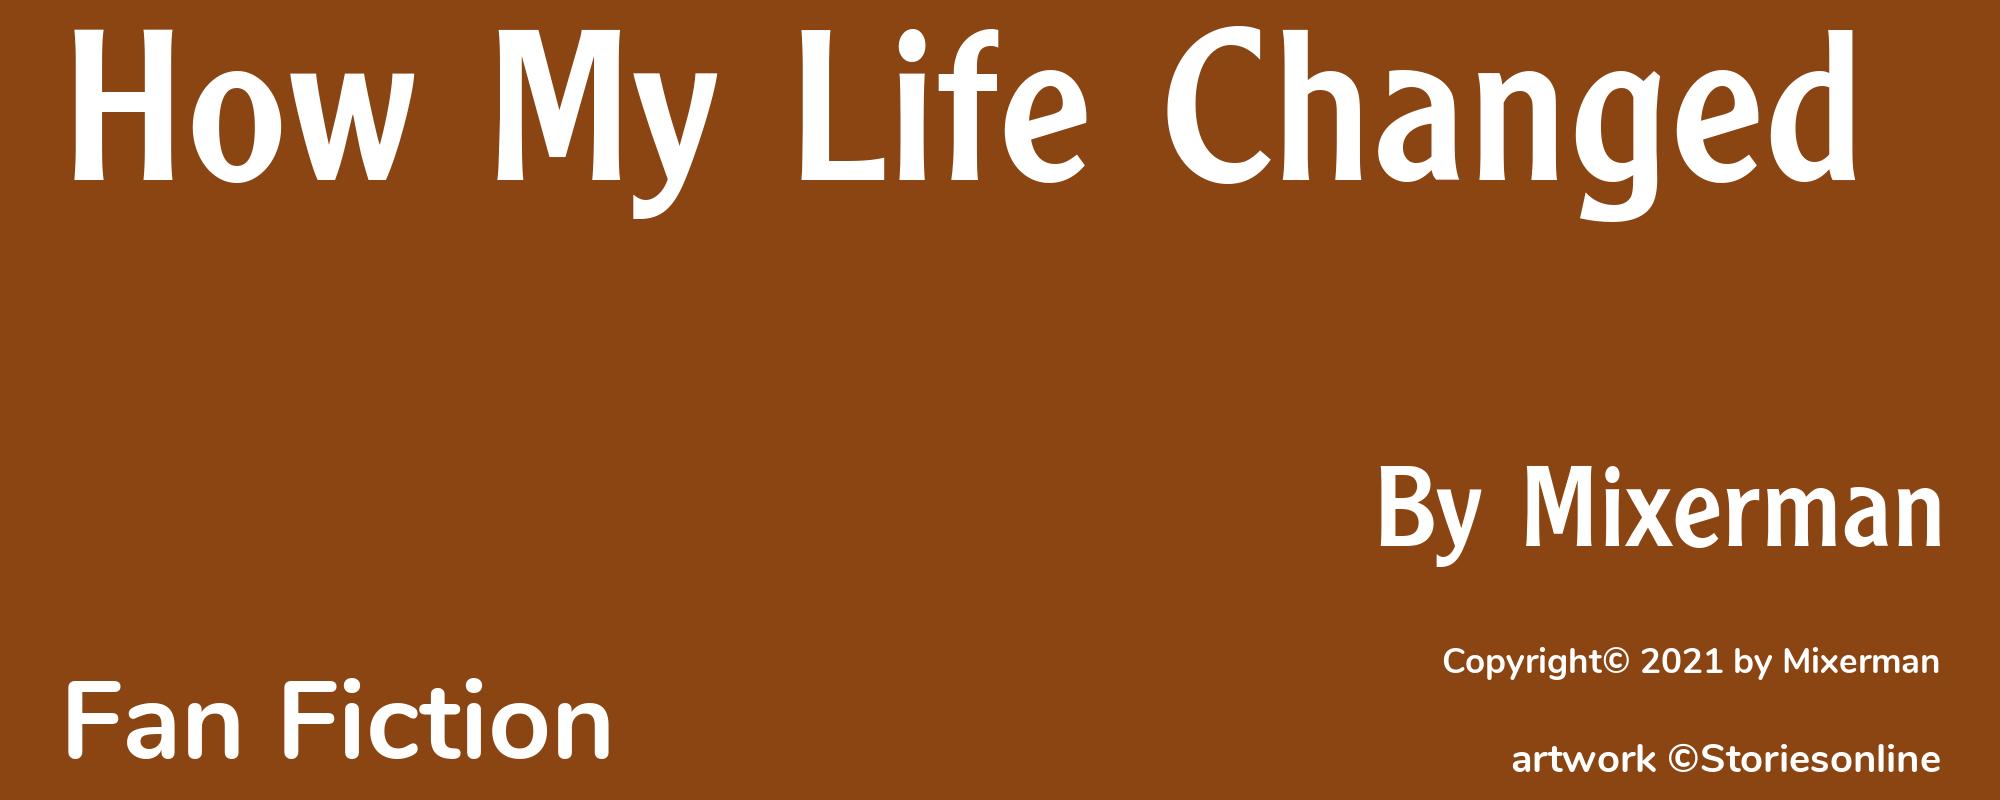 How My Life Changed - Cover